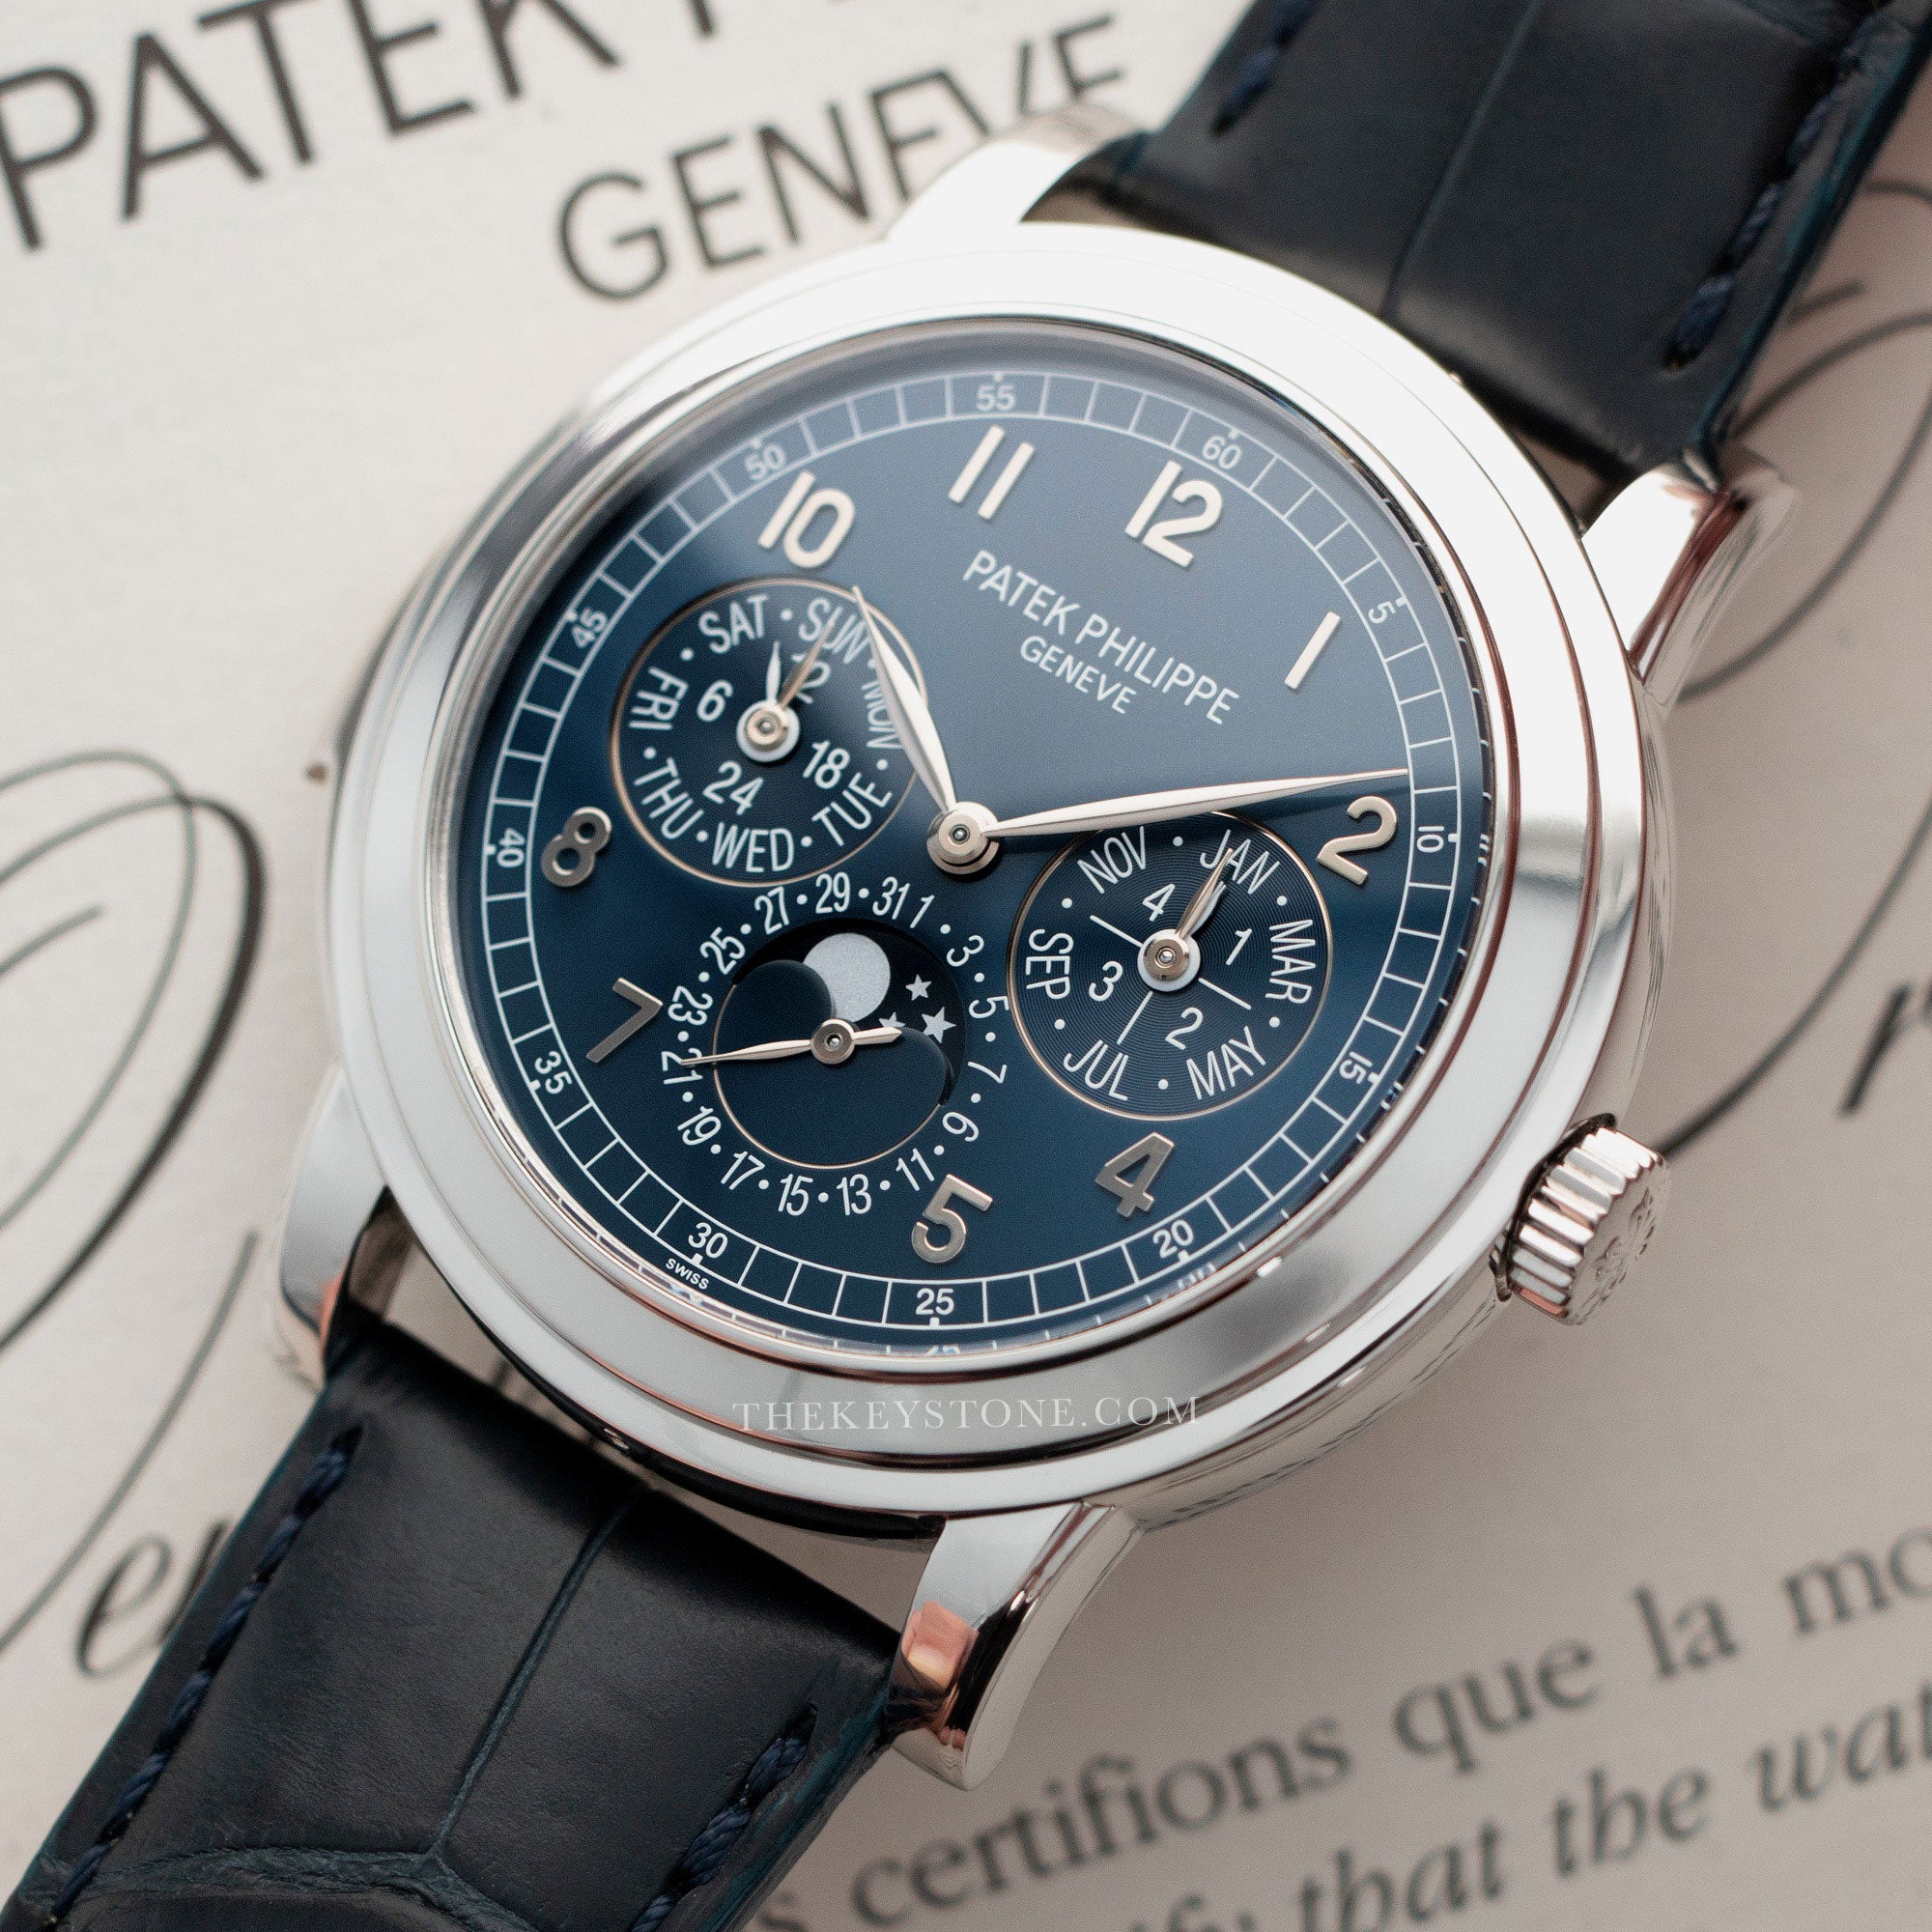 Patek Philippe - Patek Philippe Platinum Perpetual Calendar Minute Repeater Watch Ref. 5074, One of Only Two Known - The Keystone Watches